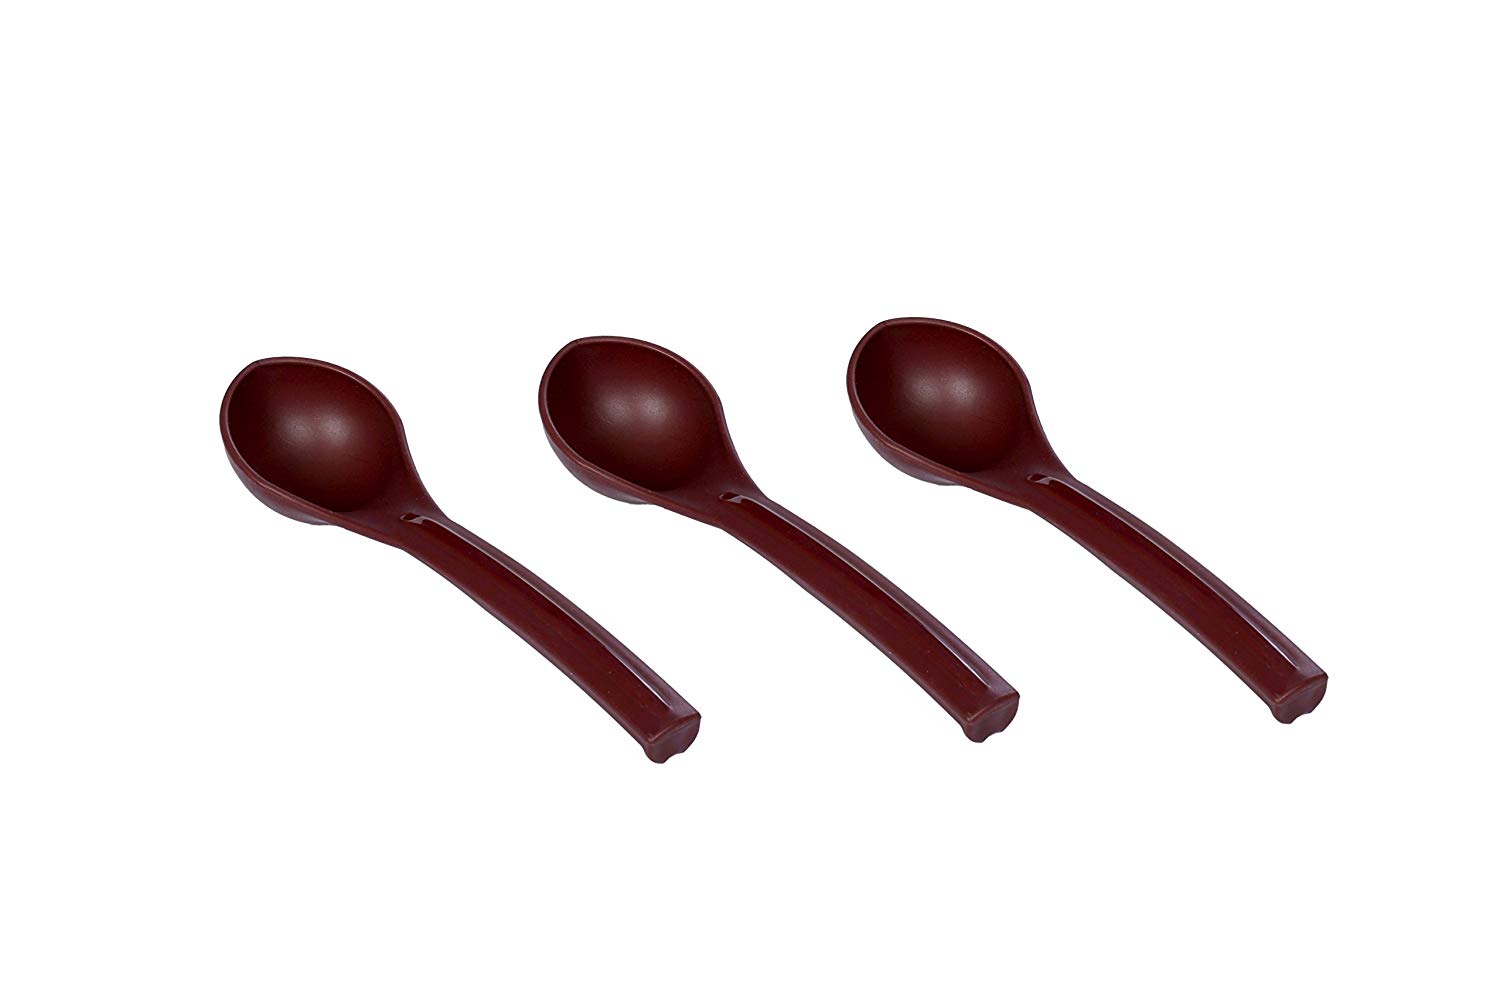 Signoraware Small Serving Ladle Set, Set of 3 Rs 85